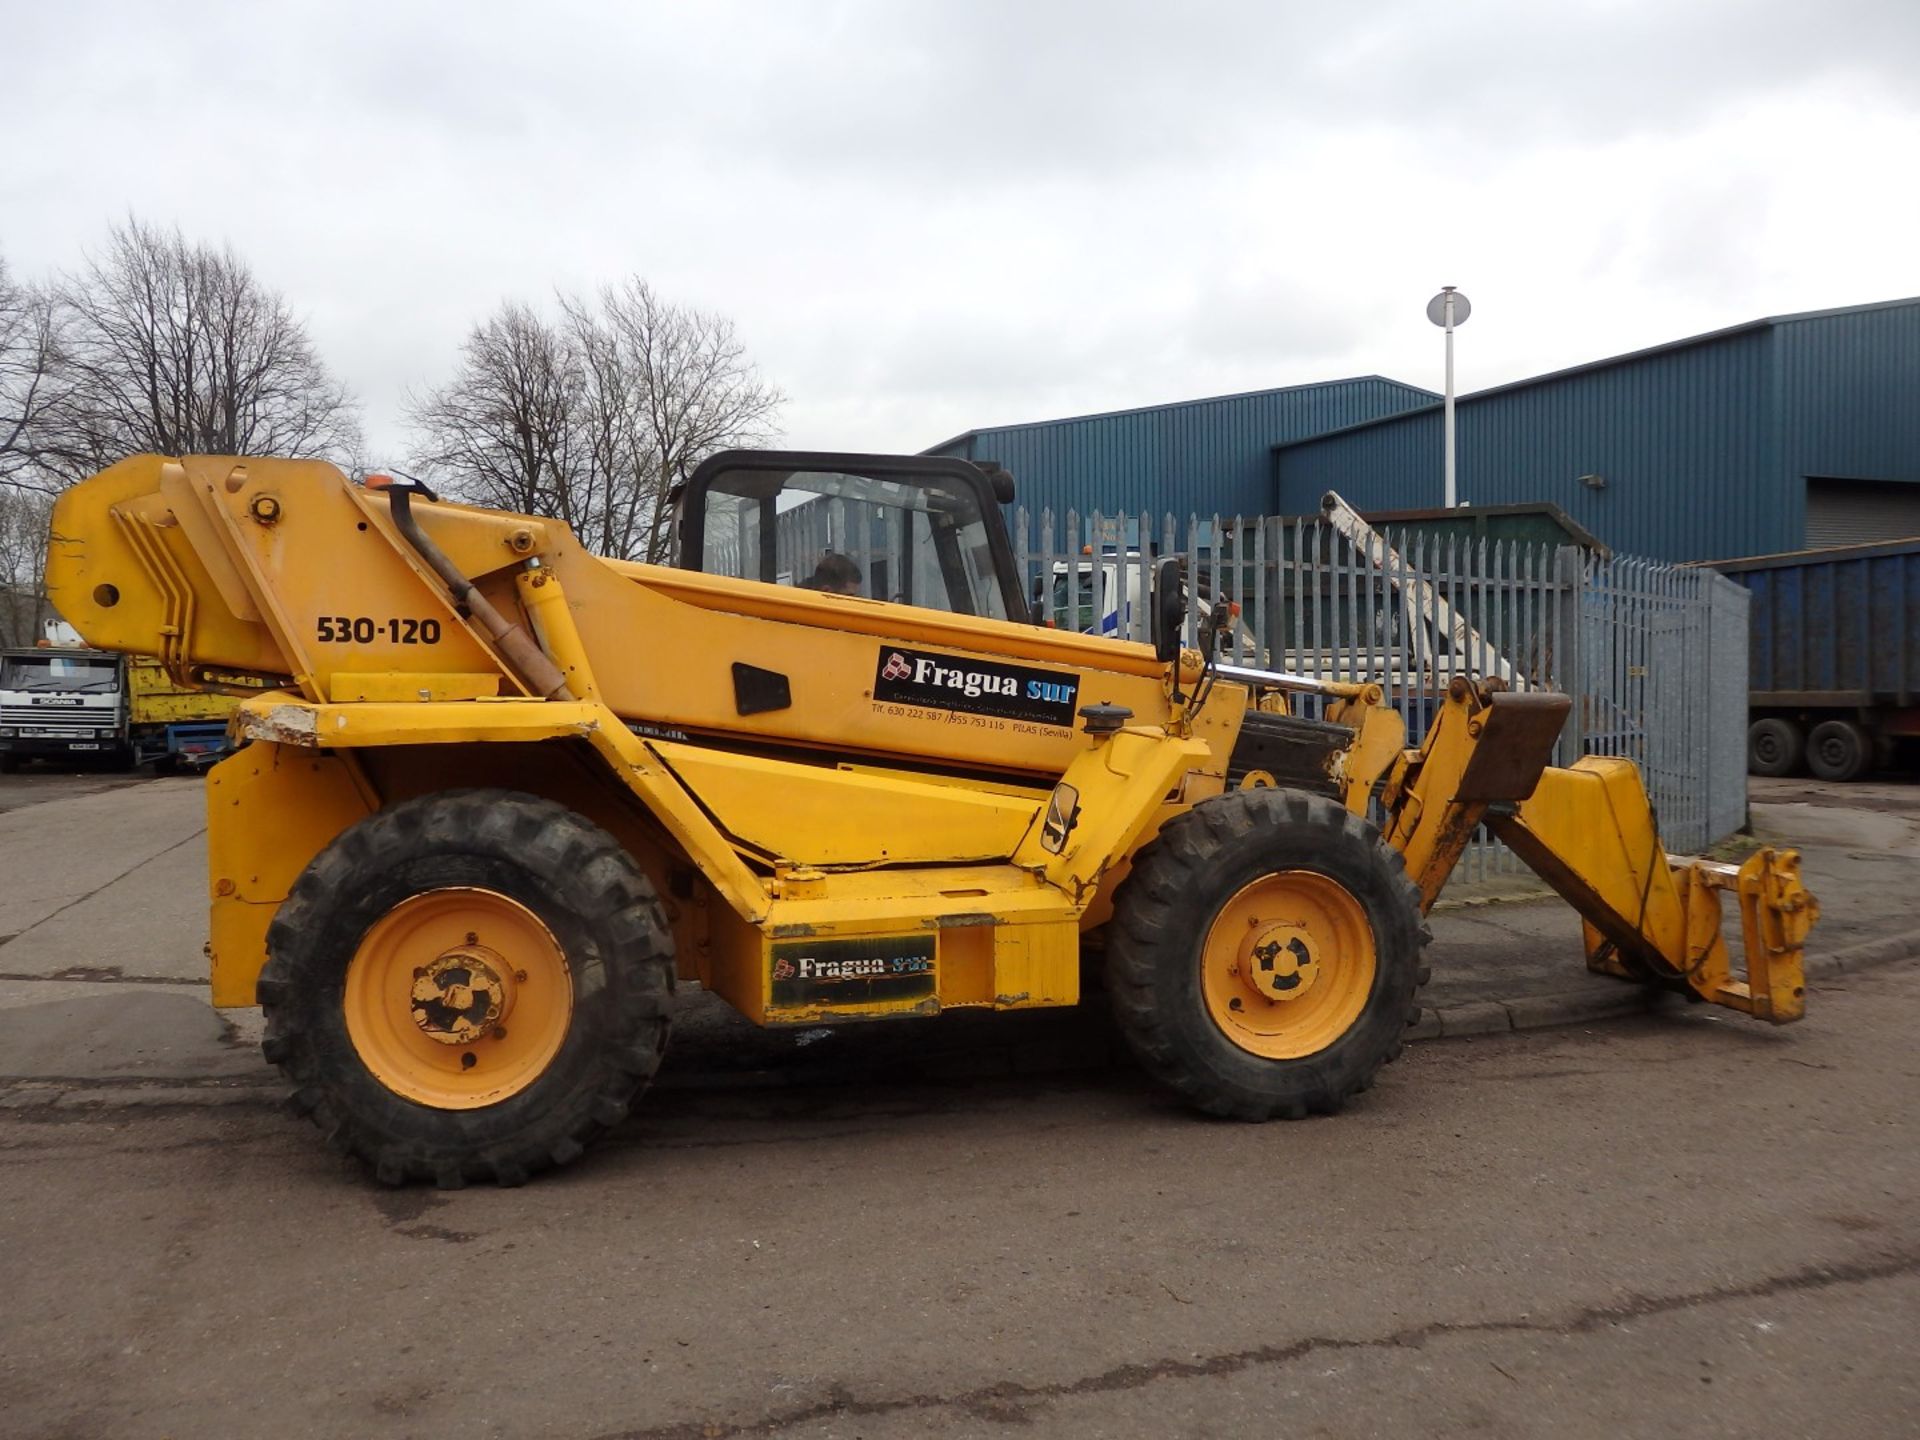 1 x JCB 530-120 Telescopic Handler With Forks - 1407 Hours - CL057 - Location: Welwyn, - Image 20 of 26